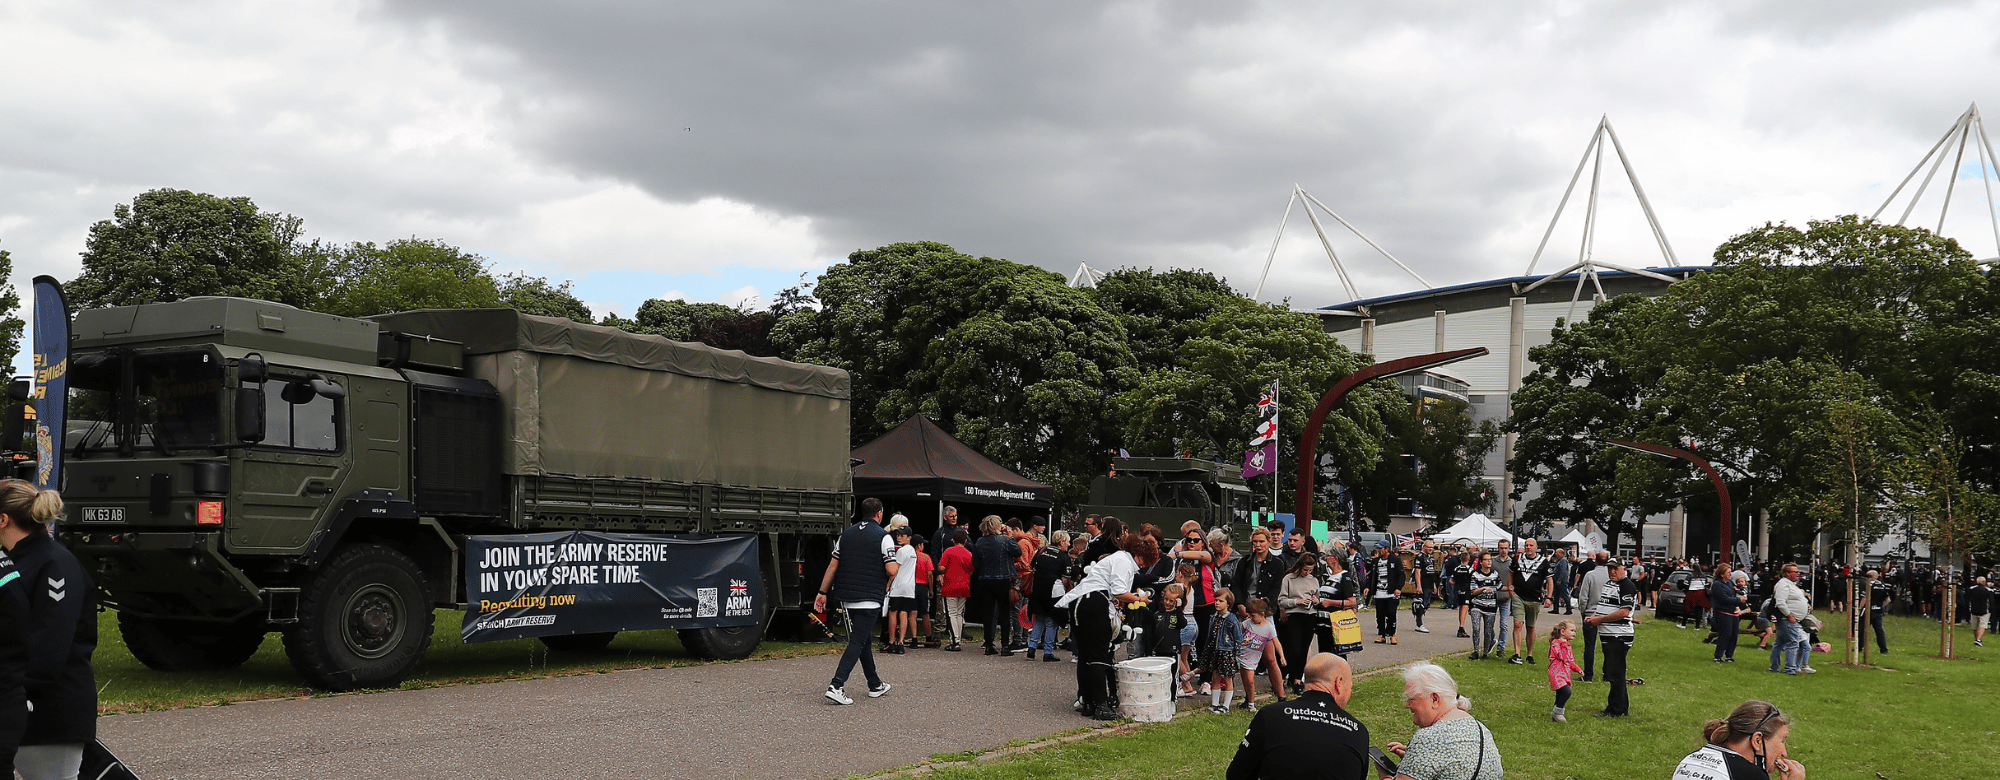 Info Guide: Armed Forces Fan Park & Military Activities On Saturday